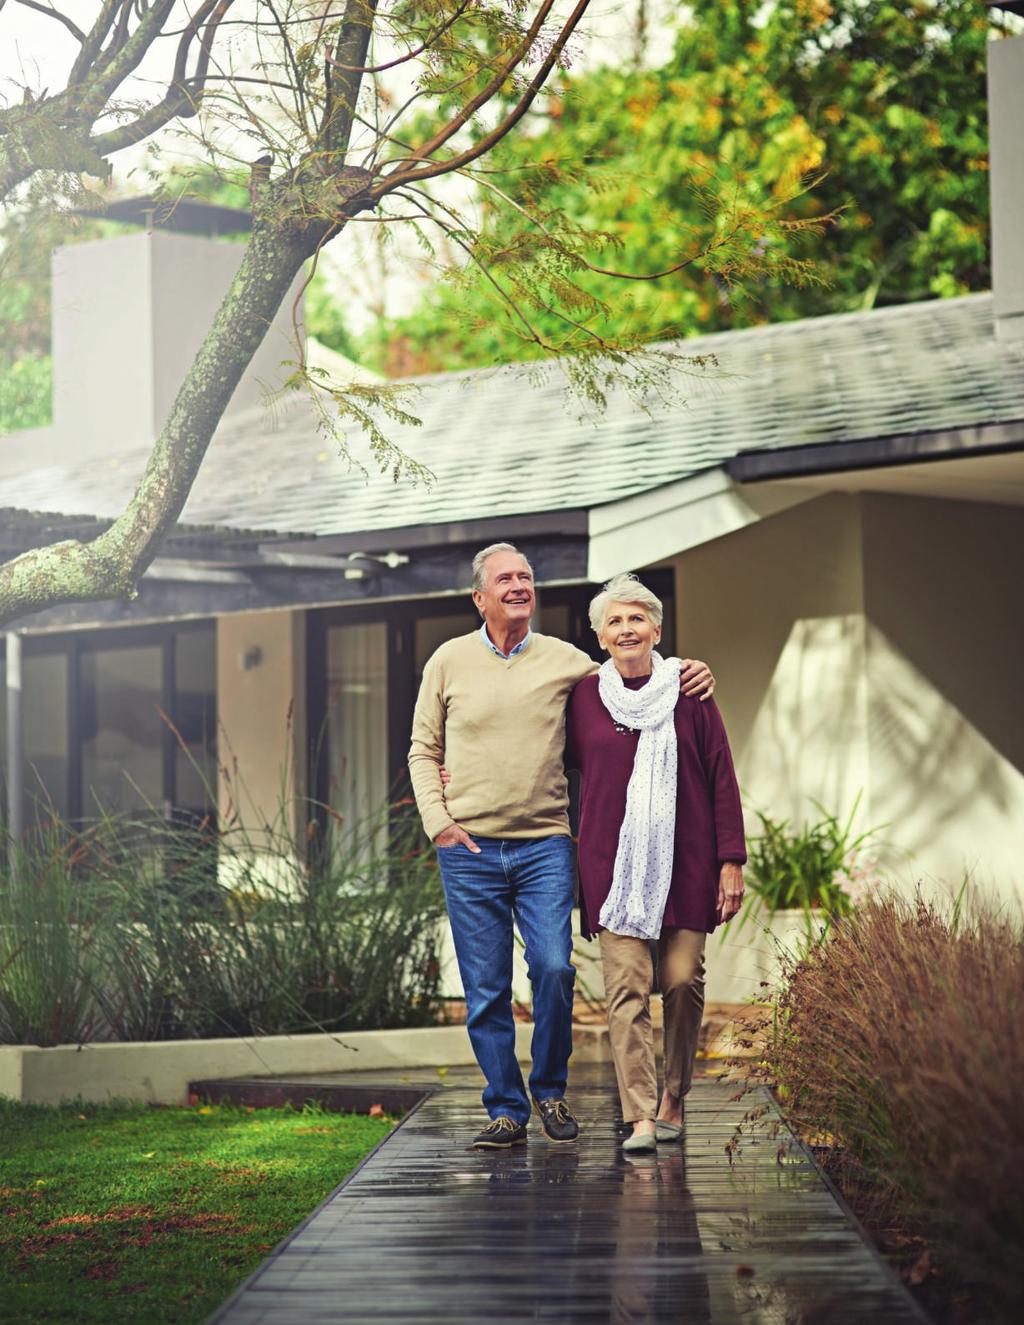 A GUIDE FOR REALTORS Using a Reverse Mortgage to Purchase a Home Contact Information Oregon Corporate Office 4949 Meadows Rd, Ste. 150 Lake Oswego, OR 97035 Ph: 503-427-1667 Fax: 503-496-0414 www.